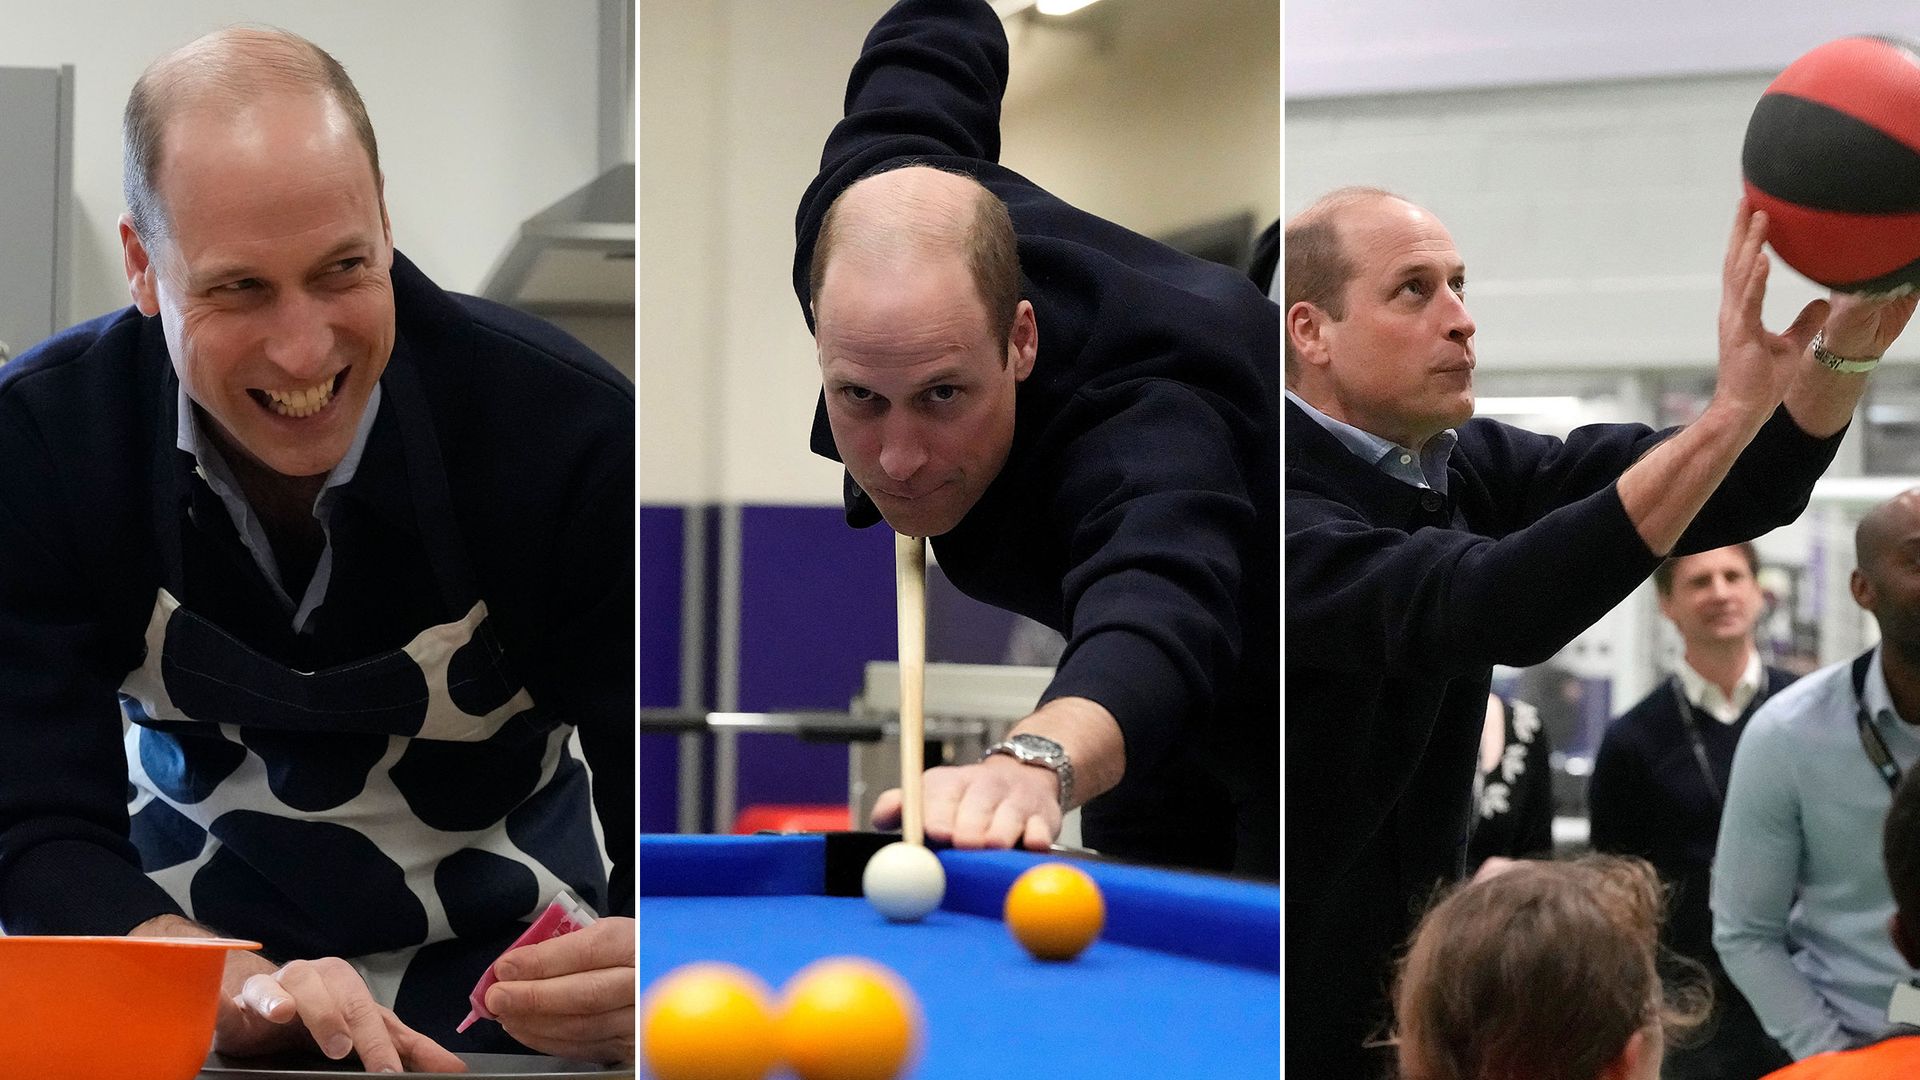 Prince William icing biscuits, playing pool and basketball